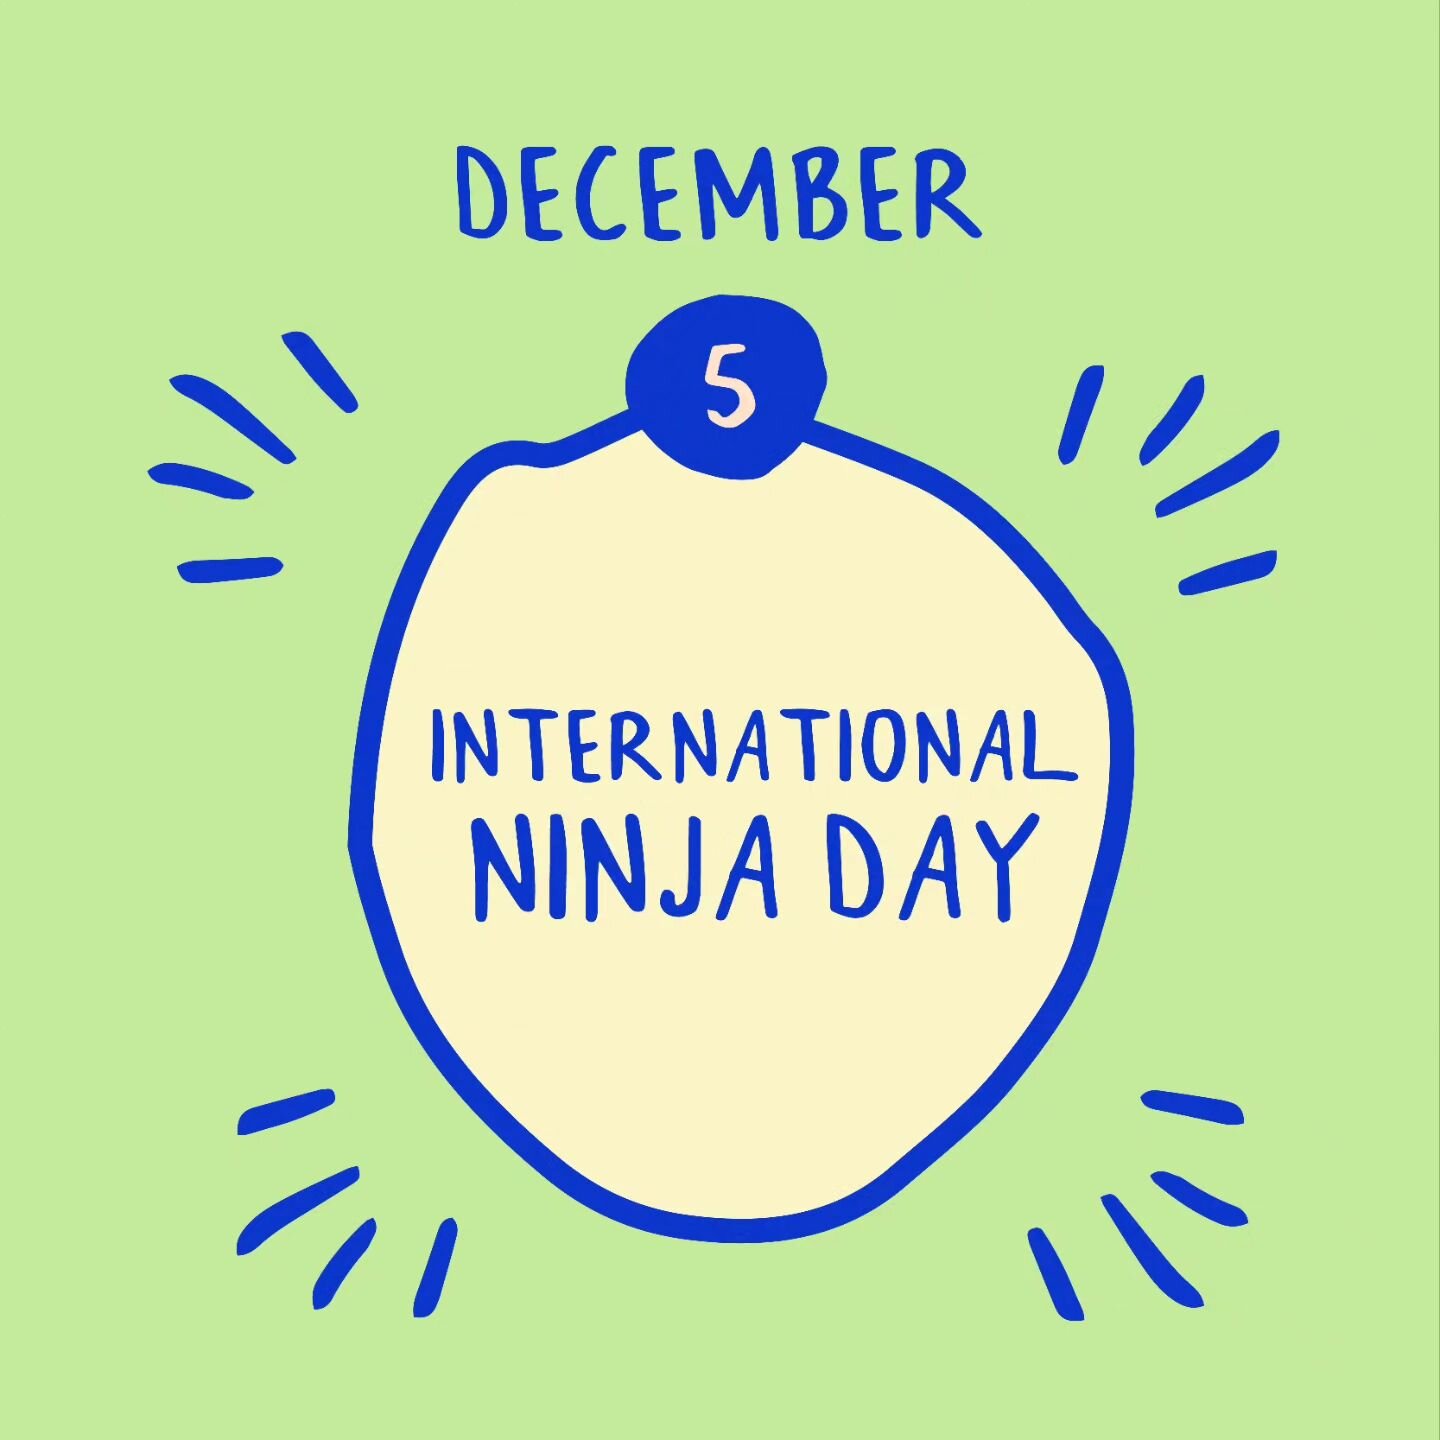 🥷 While the origins of International Ninja Day are unfortunately not well-documented, today is an opportunity to dress up in your favorite ninja attire, watch a ninja-themed movie, or participate in a ninja-related game. 

#kidcal #kidsactivities #k